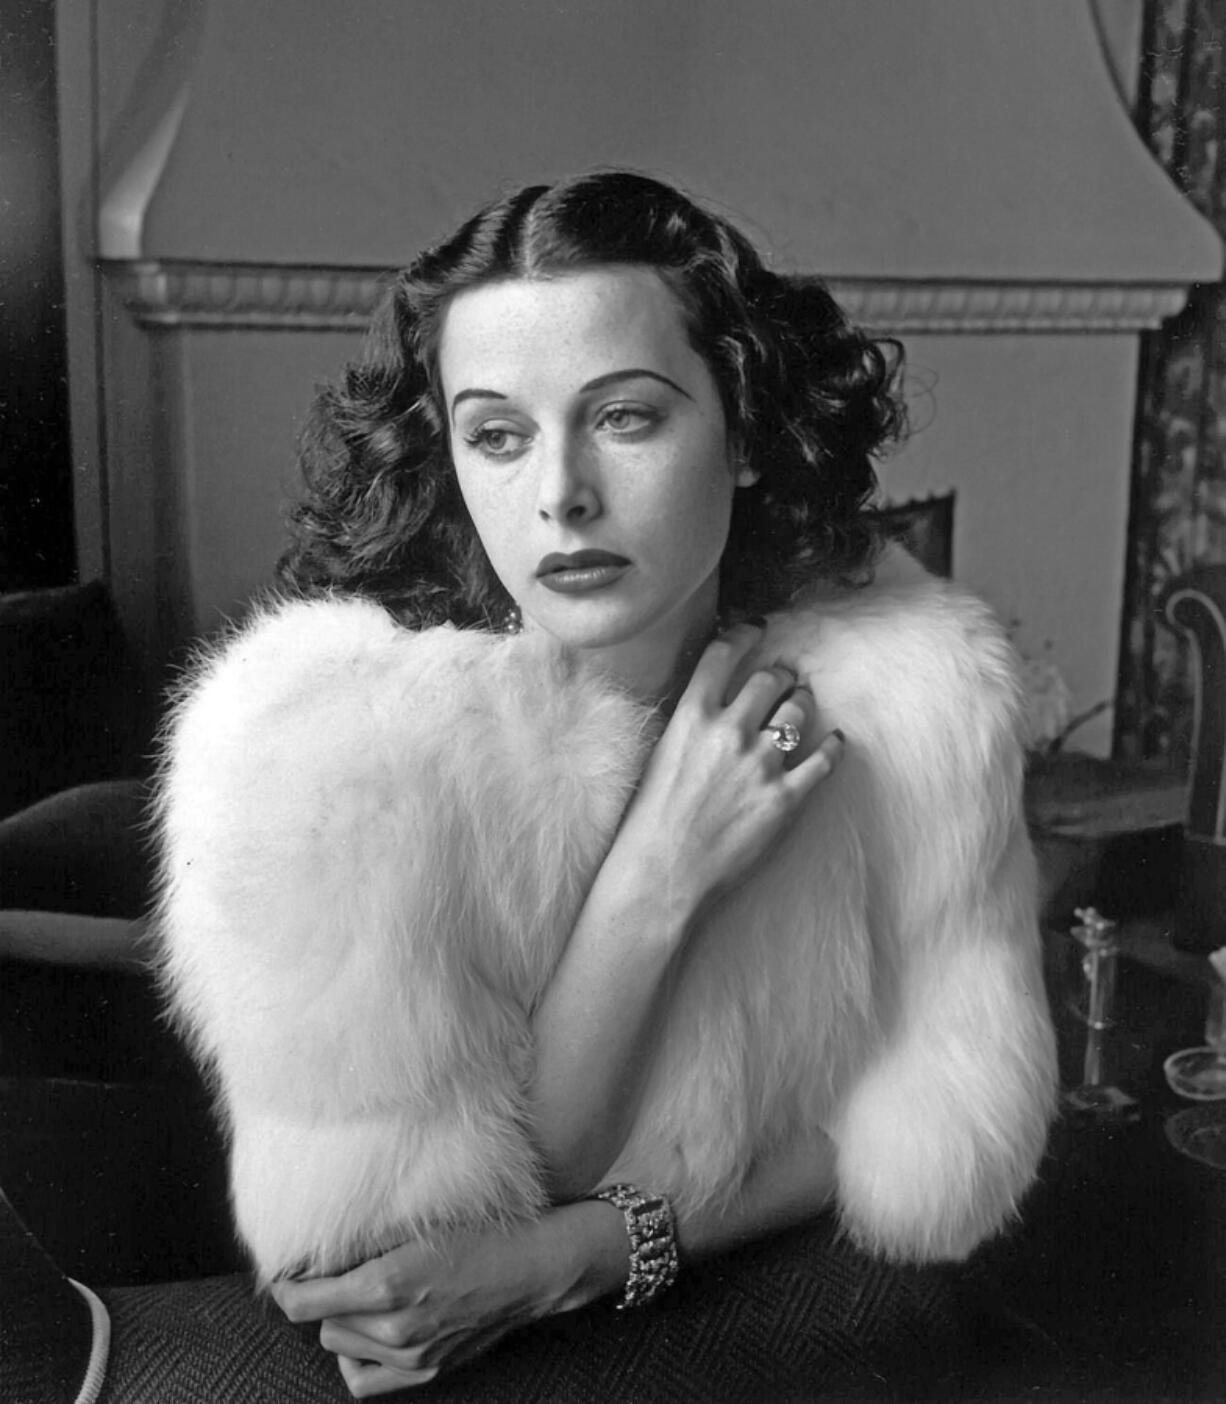 1940s movie star Hedy Lamarr, famous in her day as “the most beautiful woman in the world,” is the subject of a “Science on Tap” talk at the Kiggins Theatre on Wednesday, and a new documentary about her life that starts screening on Friday.